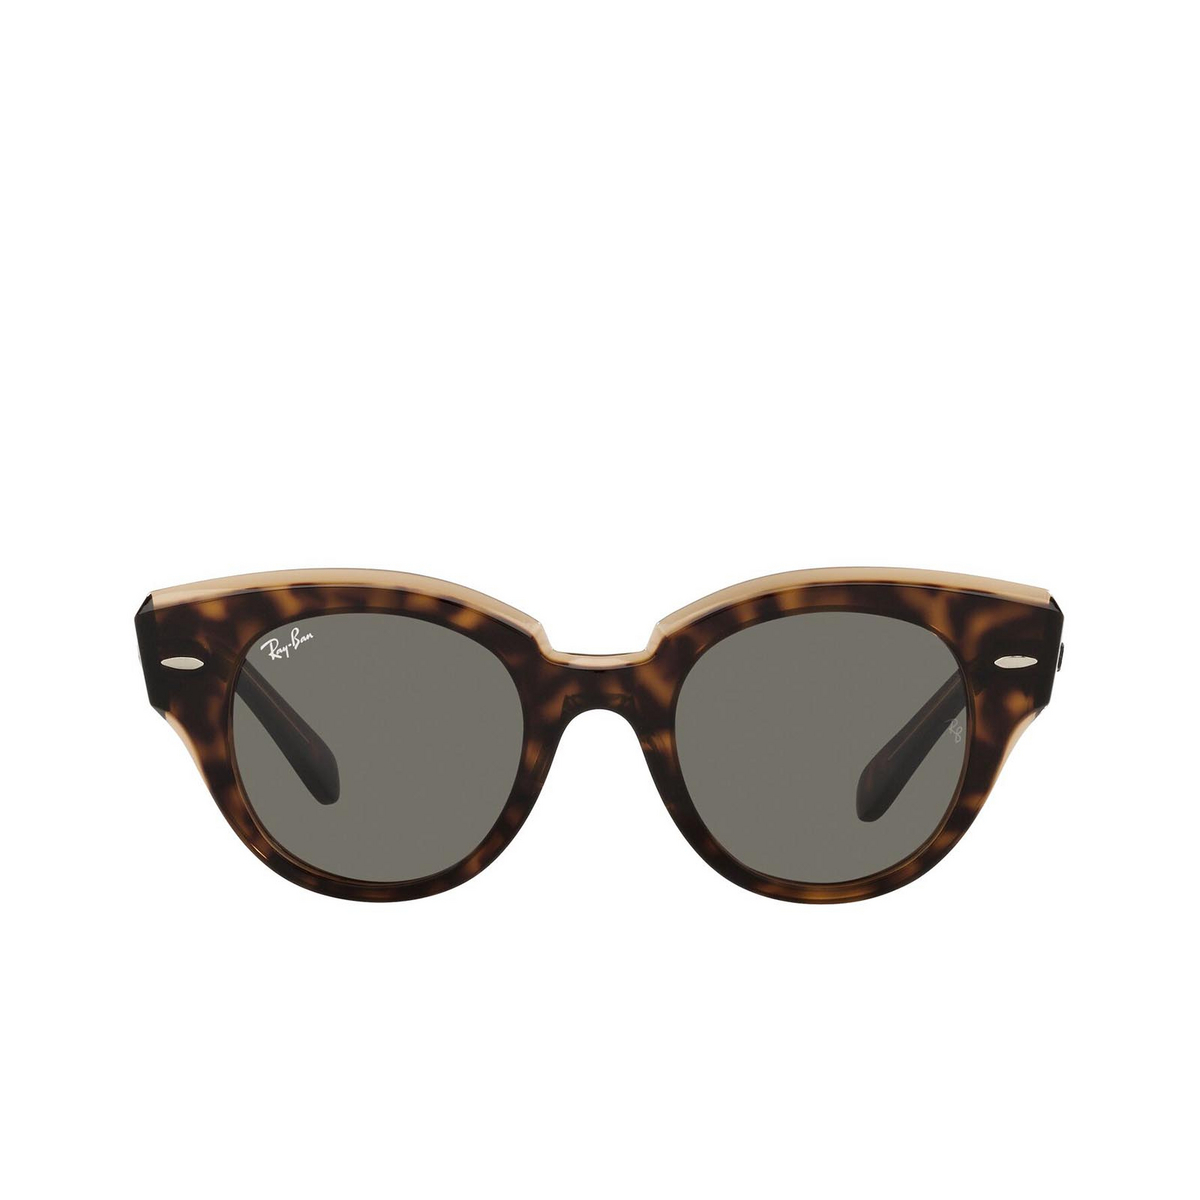 Occhiali da sole Ray-Ban ROUNDABOUT 1292B1 Havana on Transparent Brown - frontale